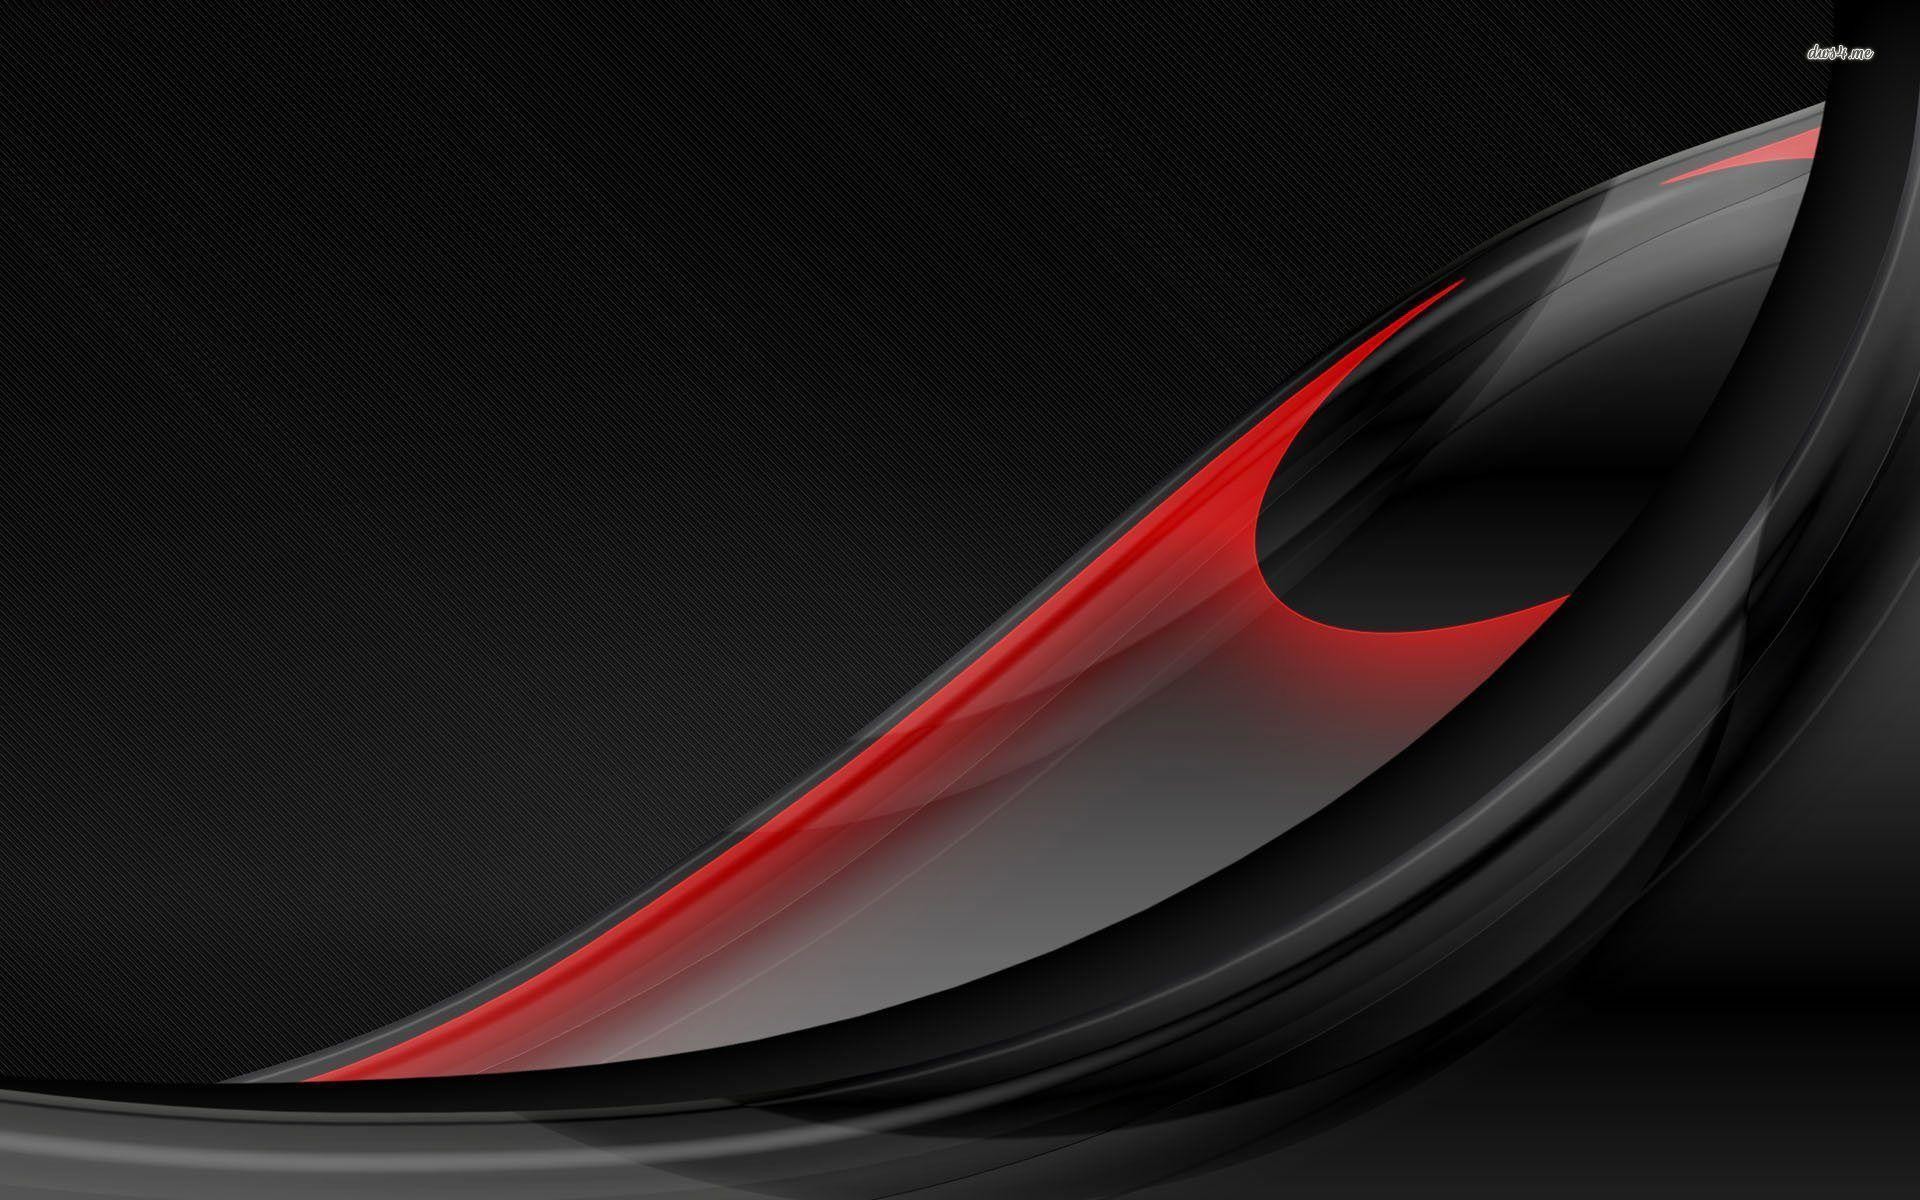 1920x1200 Black And White And Red Abstract Wallpaper Hd Cool 7 HD Wallpapers .